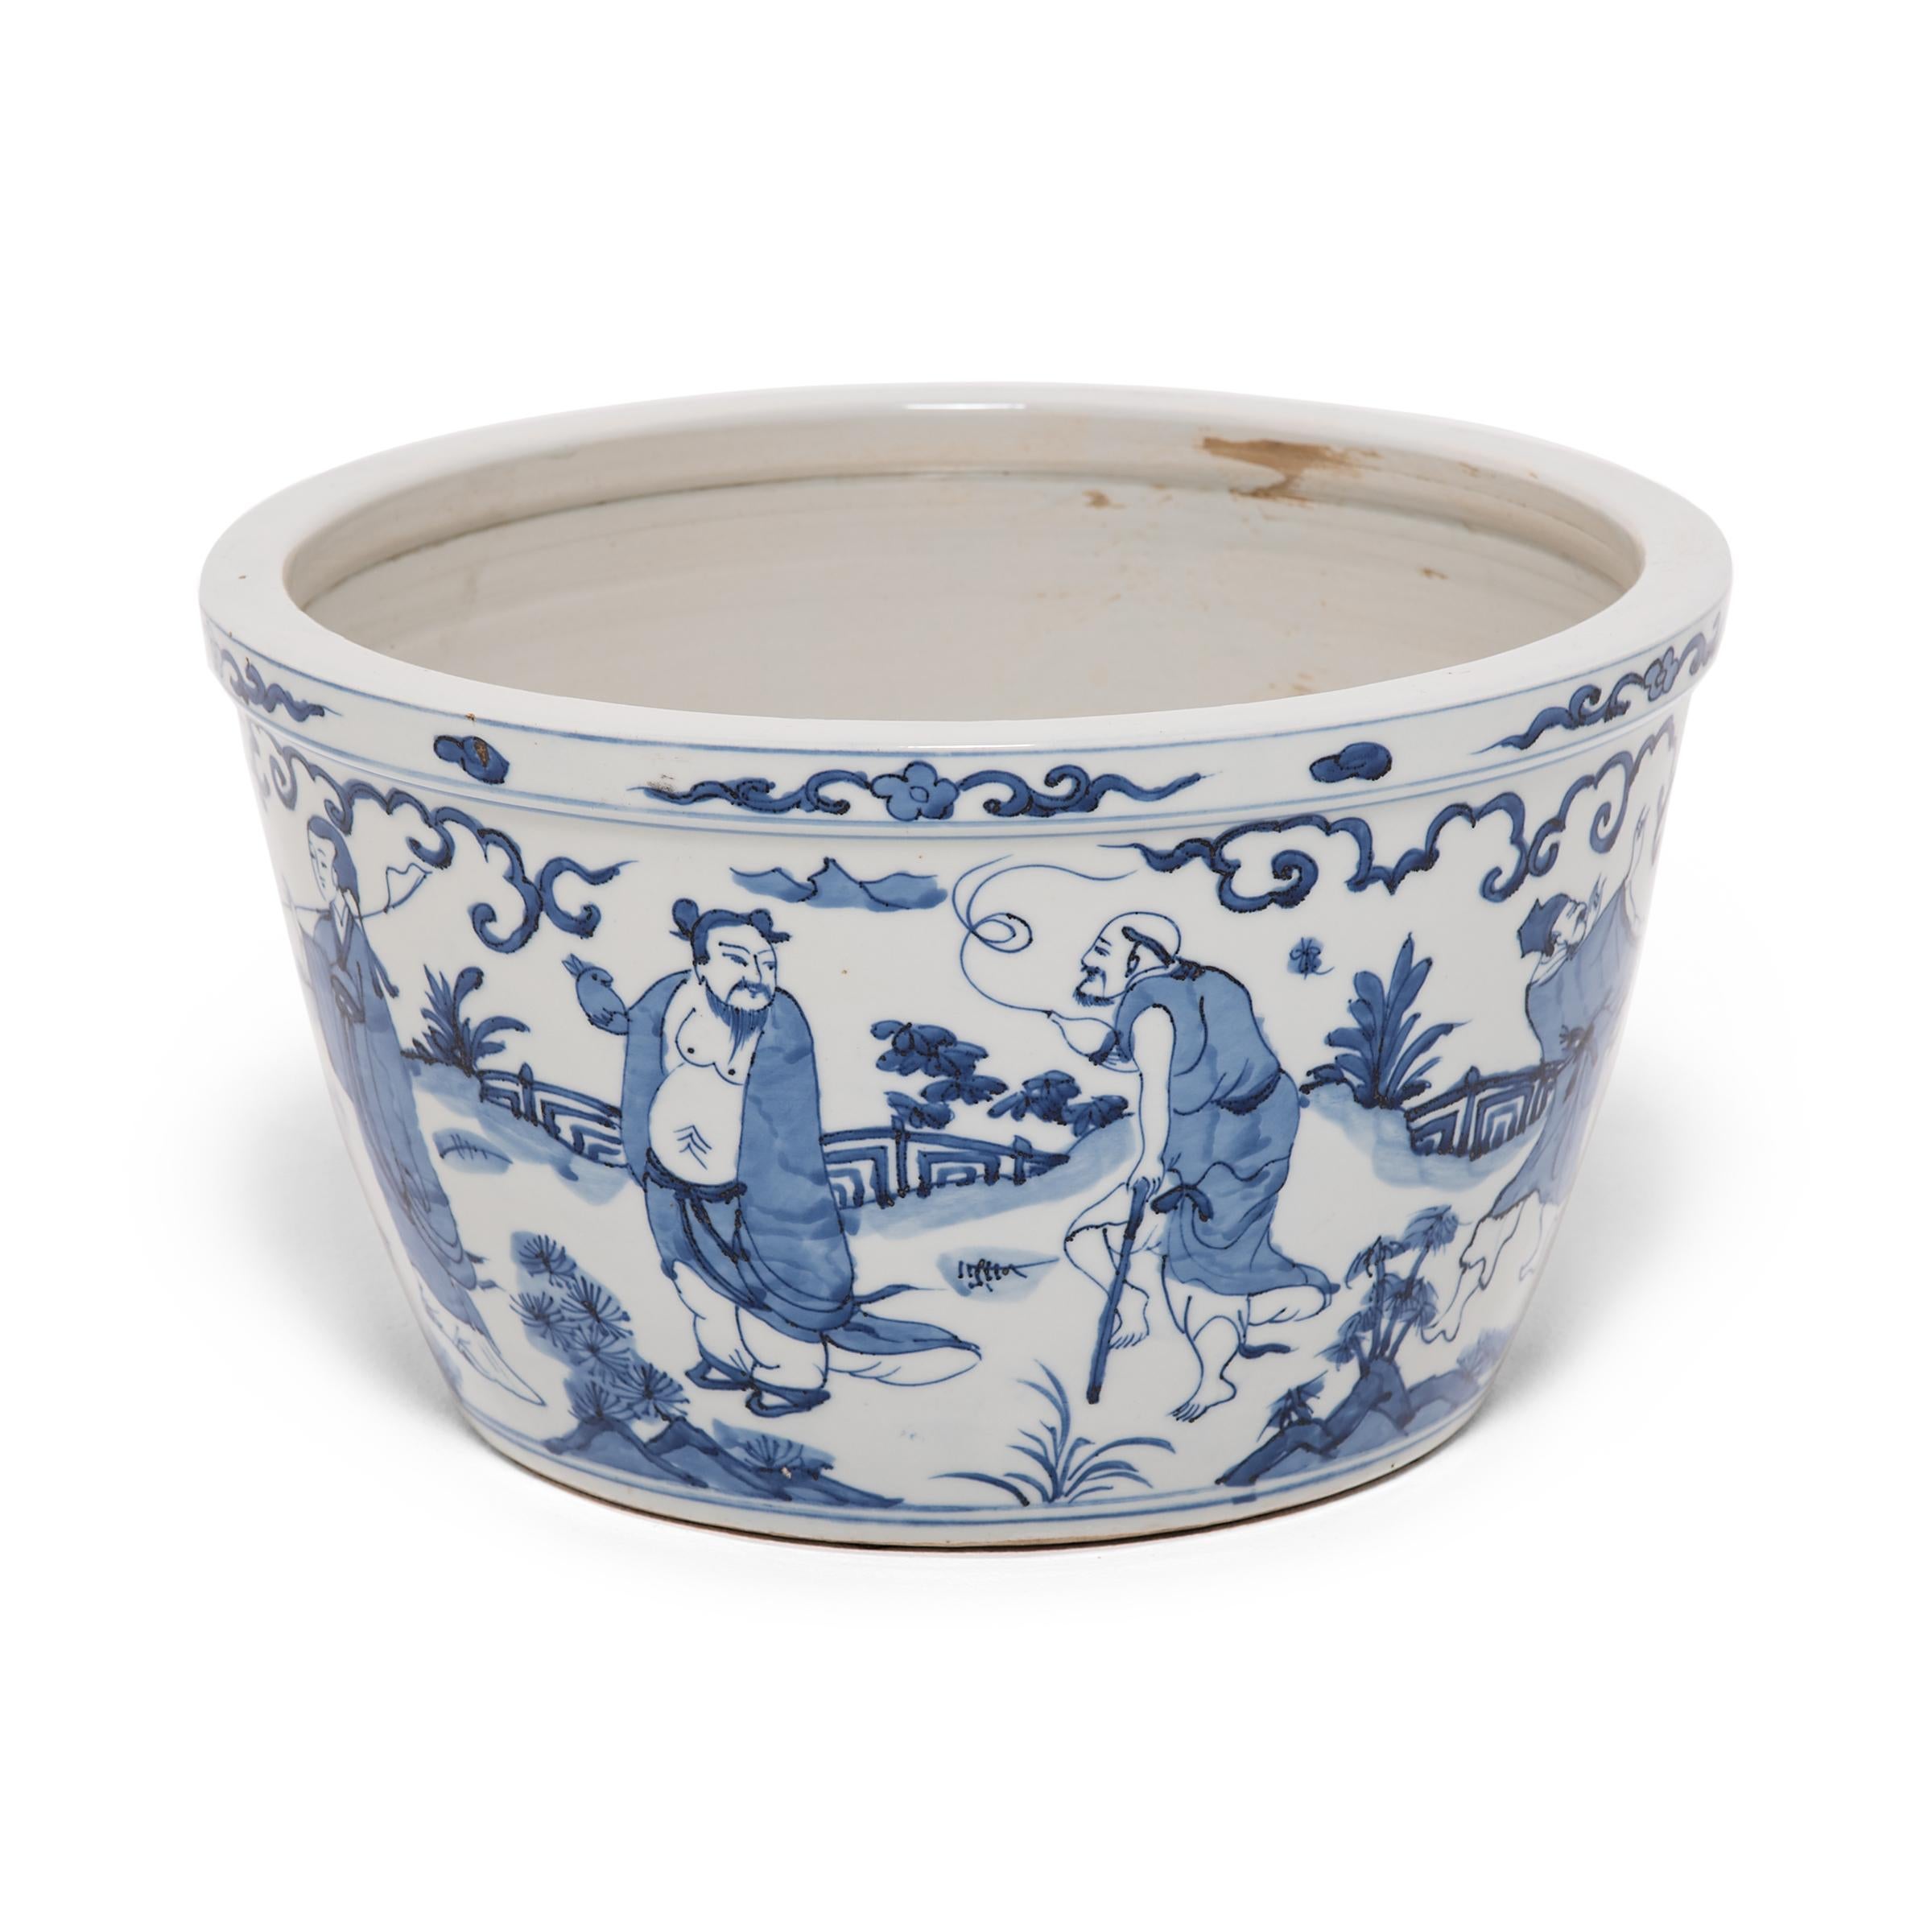 Designed for cultivating goldfish, charmed pets that created good feng shui, this fish bowl is a stunning example of the art of blue-and-white porcelain. Perfected by Chinese artisans over centuries, this ceramic tradition exploits the rich blue of